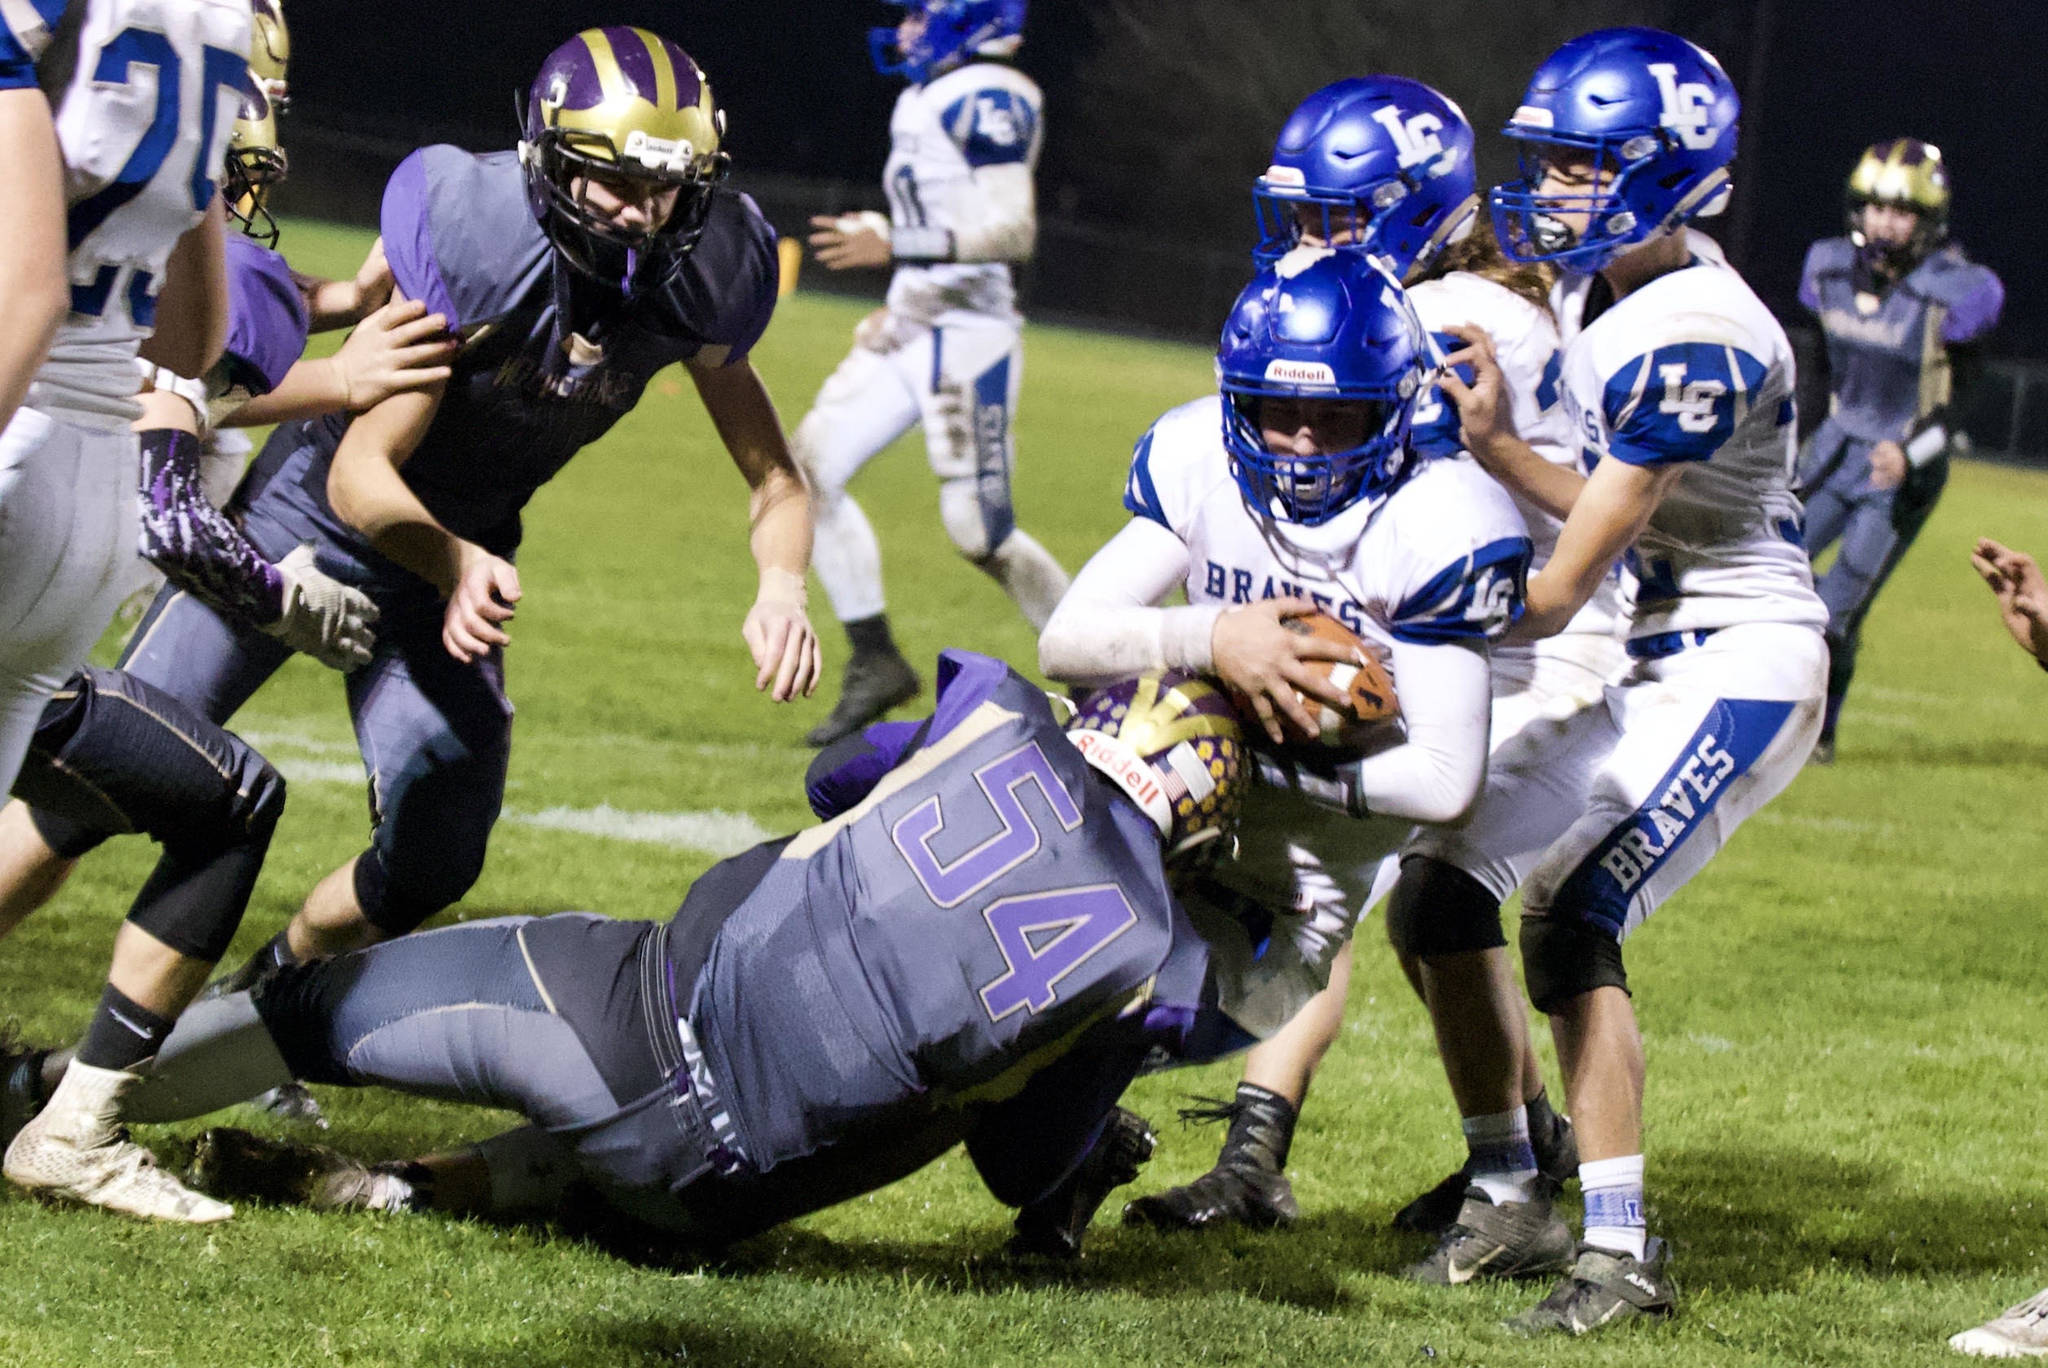 Gavin Mason, No. 54, puts a stop on the Braves ball carrier. (John Stimpson/Contributed photo.)